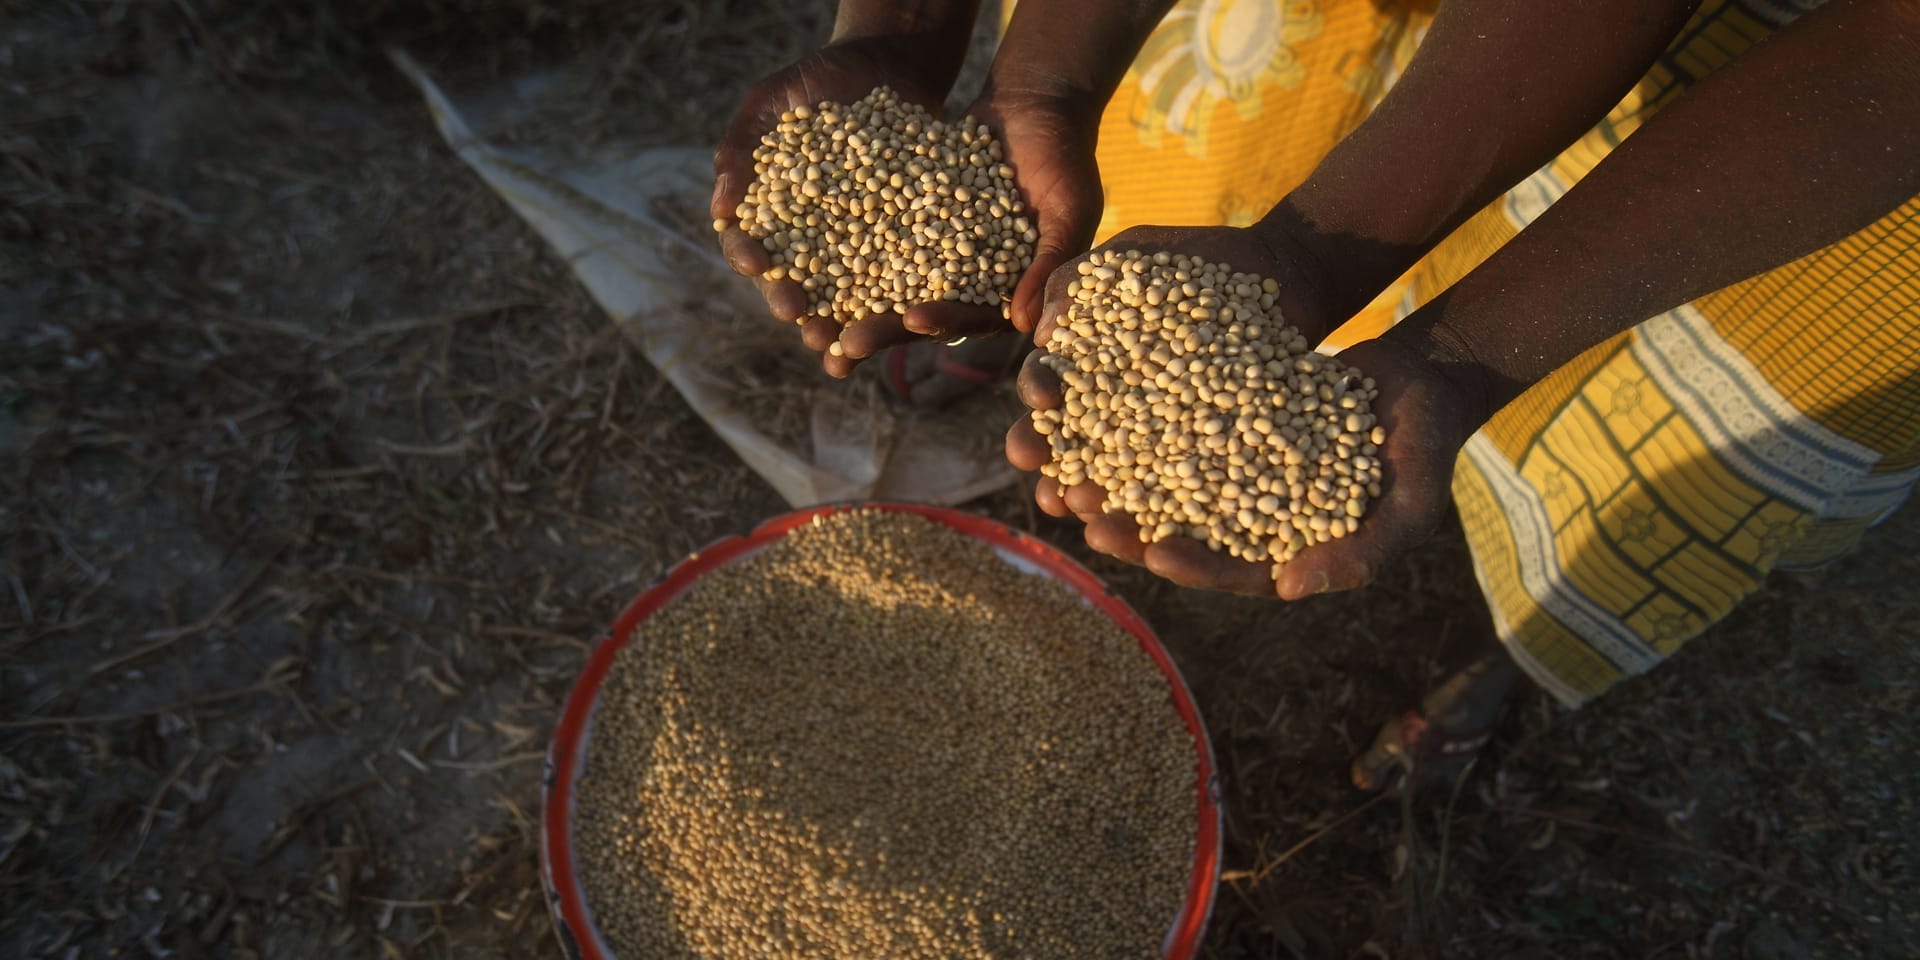 Image of two pairs of hands each holding a large mound of beans above a large bowl filled with them.